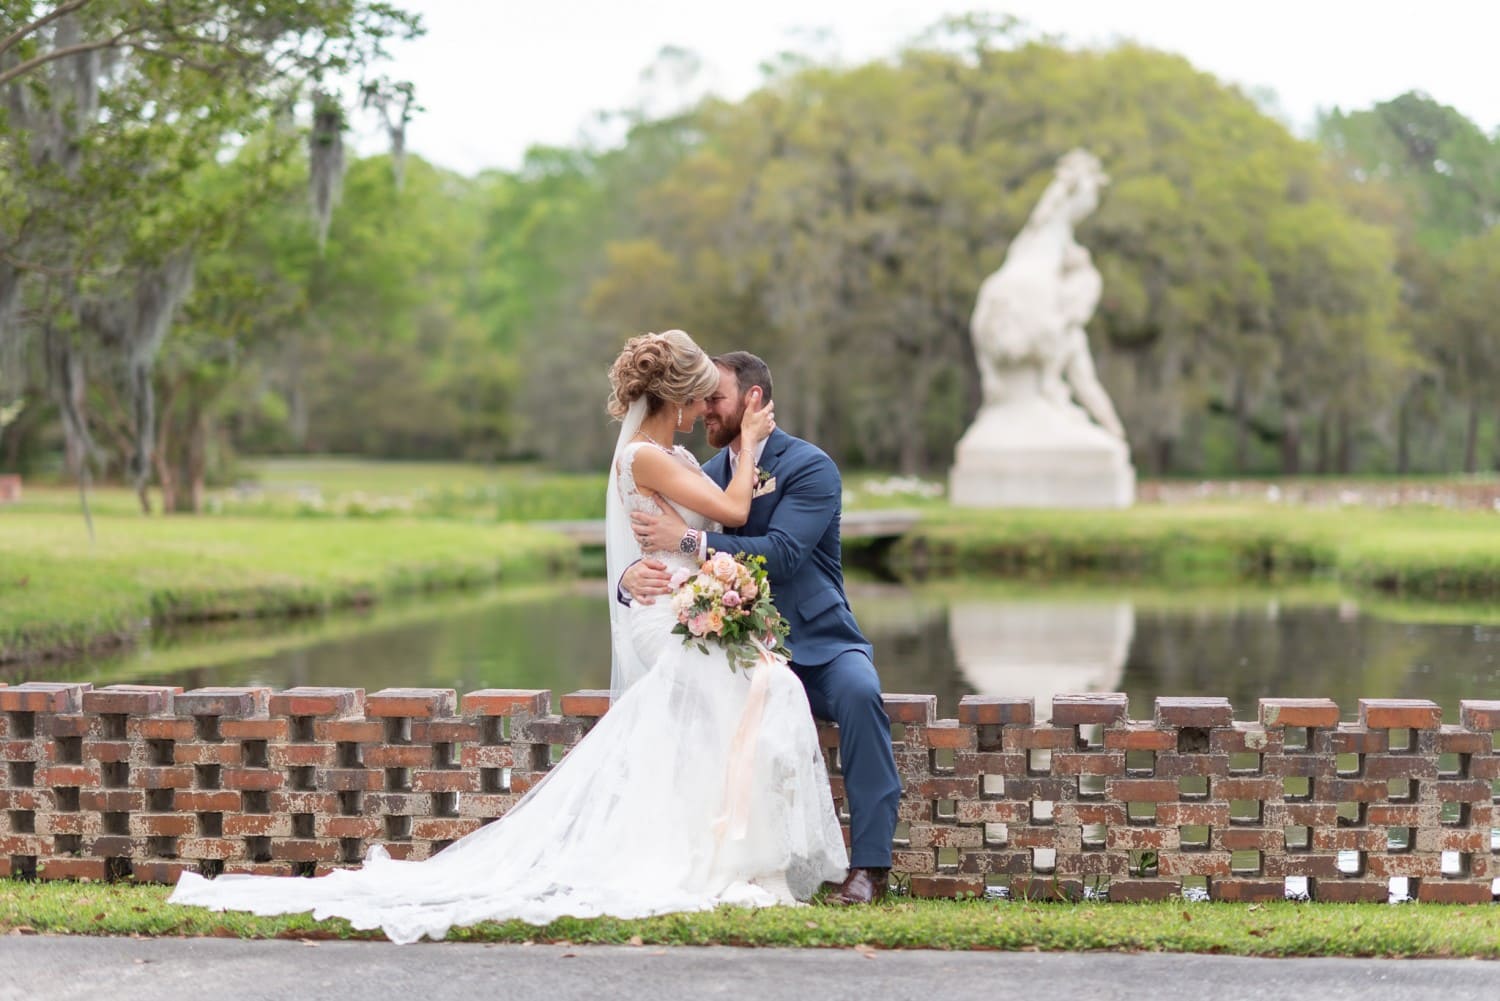 Bride and groom with "Youth Taming the Wild" sculpture in the background - Brookgreen Gardens